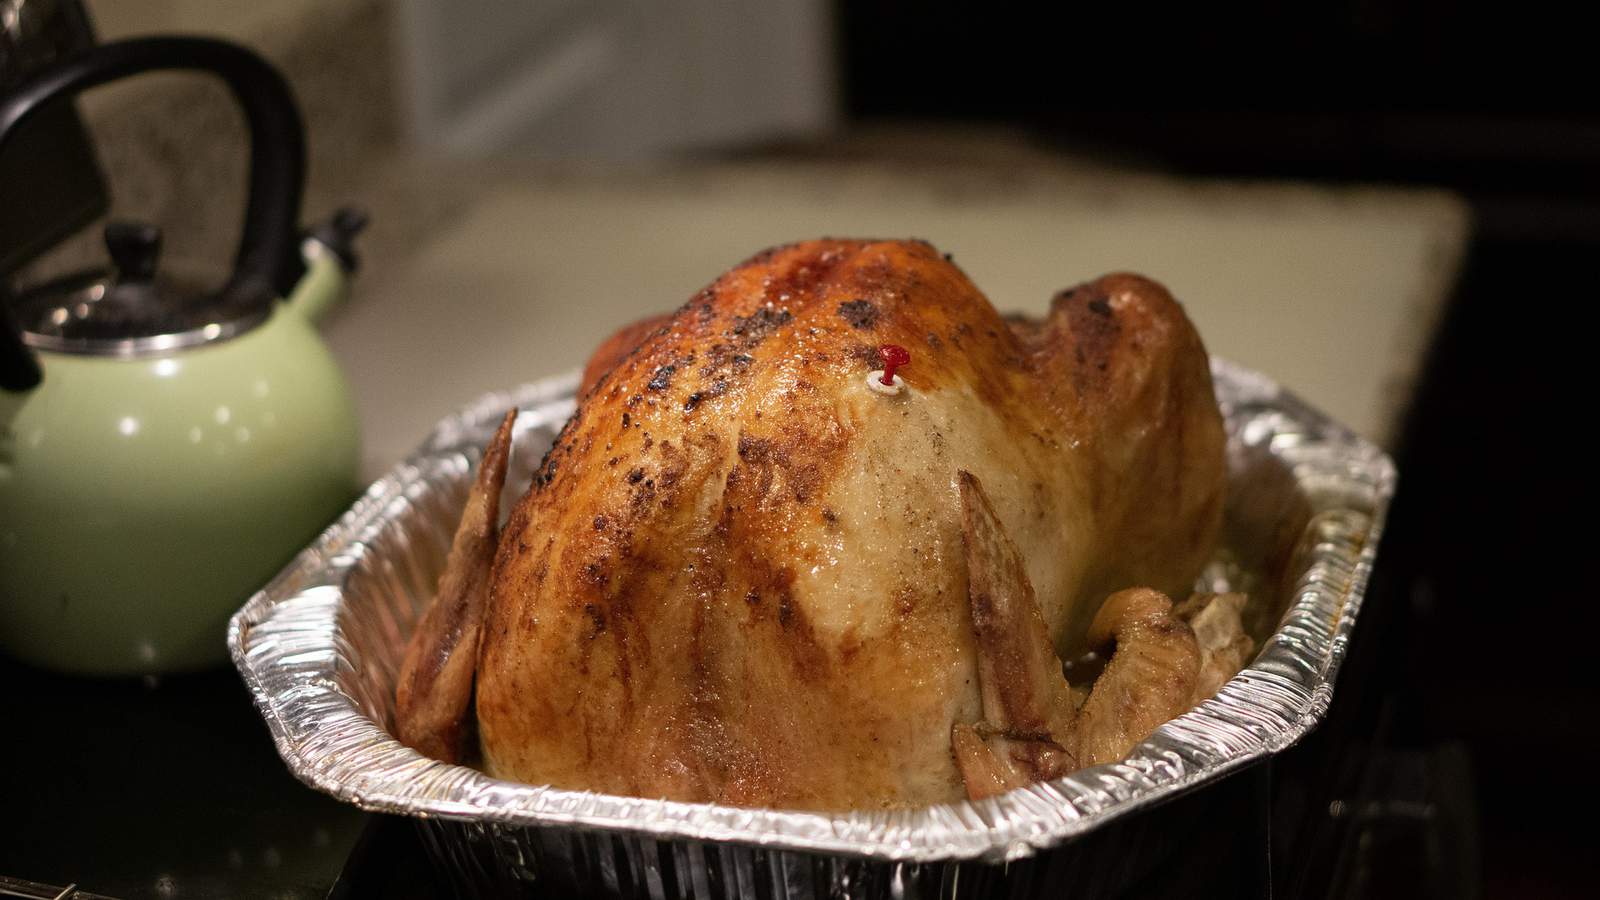 For rookie Thanksgiving cooks, expert tips to avoid disaster